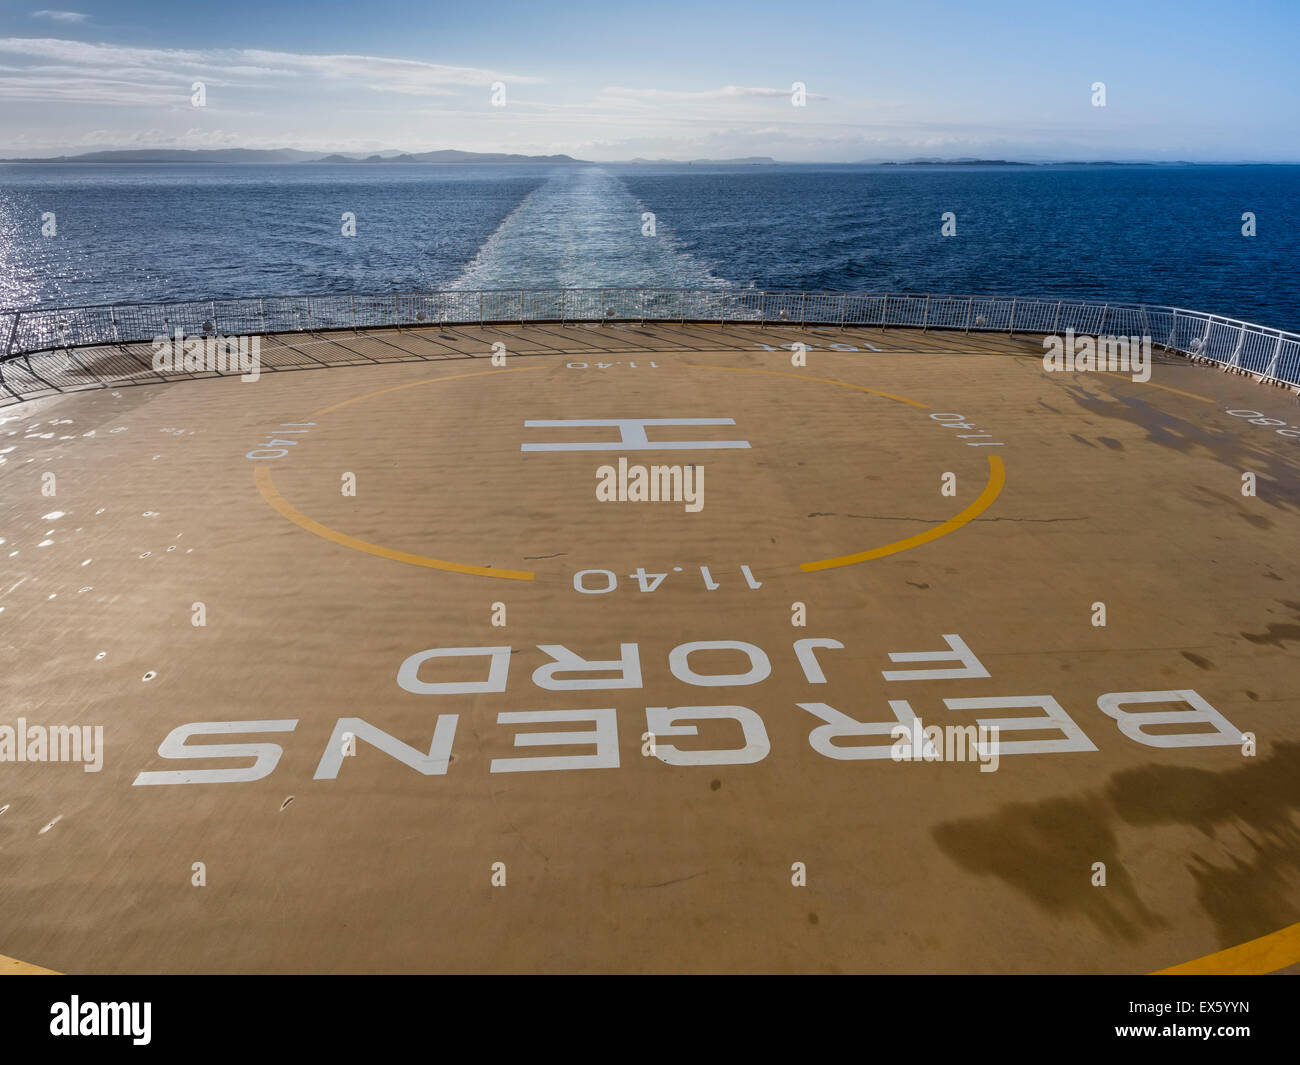 Ferry of the Fjordline compayn, Danmark-Norway, helicopter landing area, norwegian coast in the background. Stock Photo